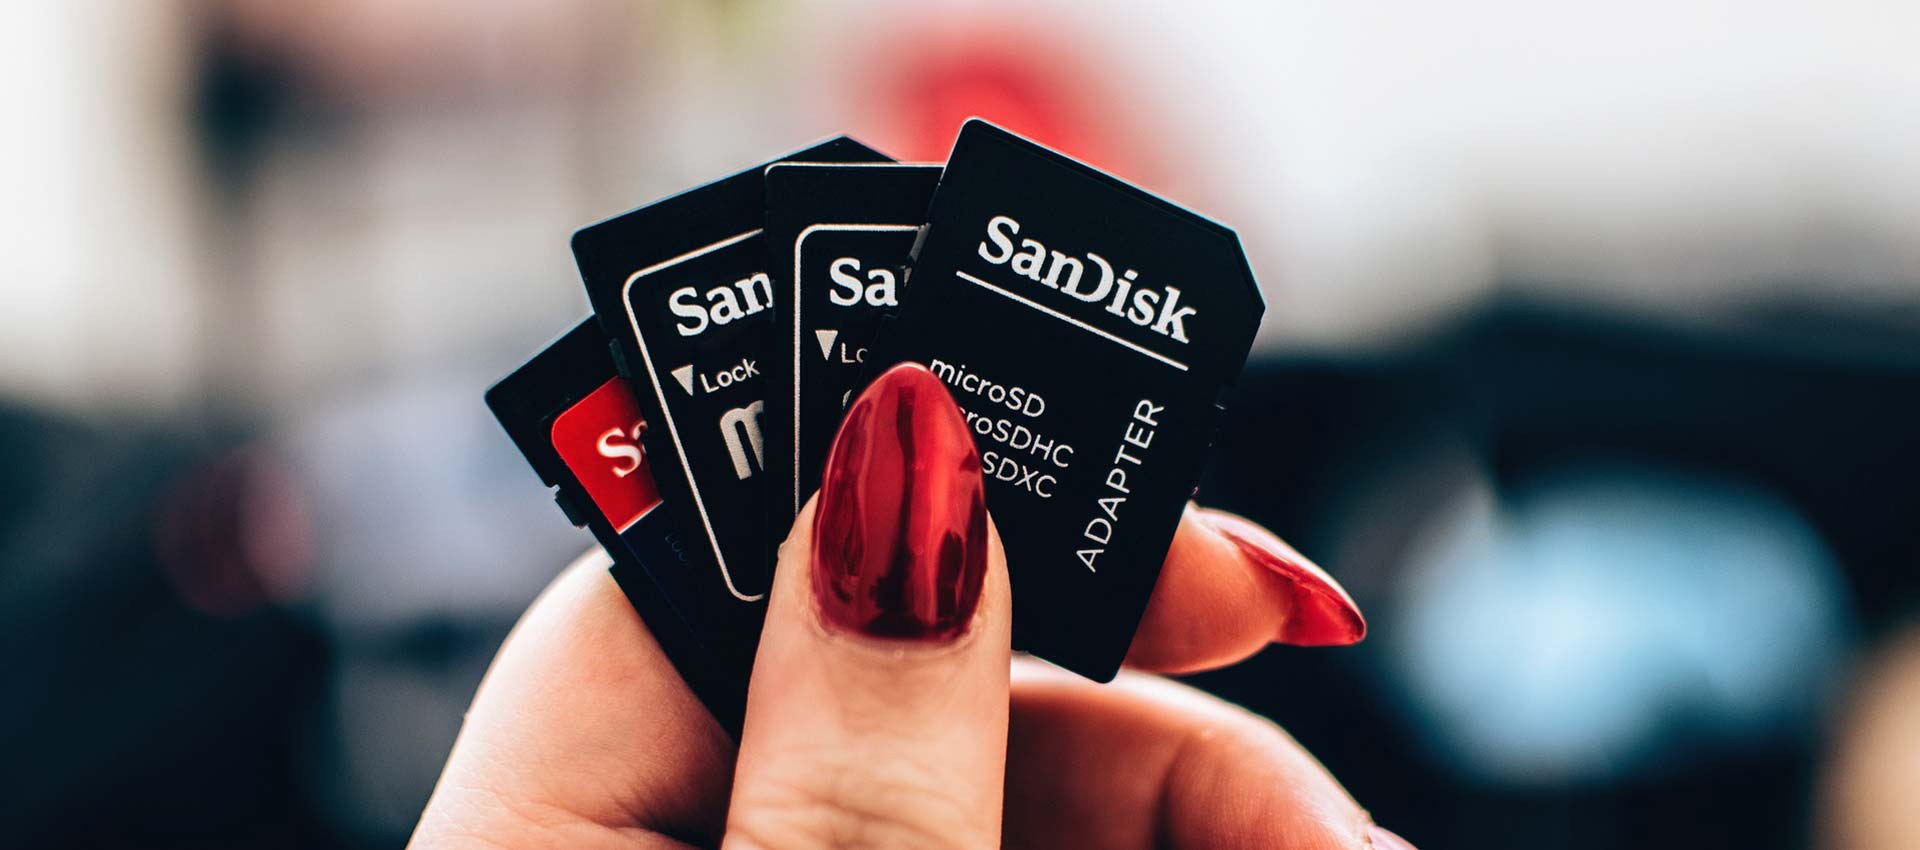 Latest SanDisk Products in Pakistan